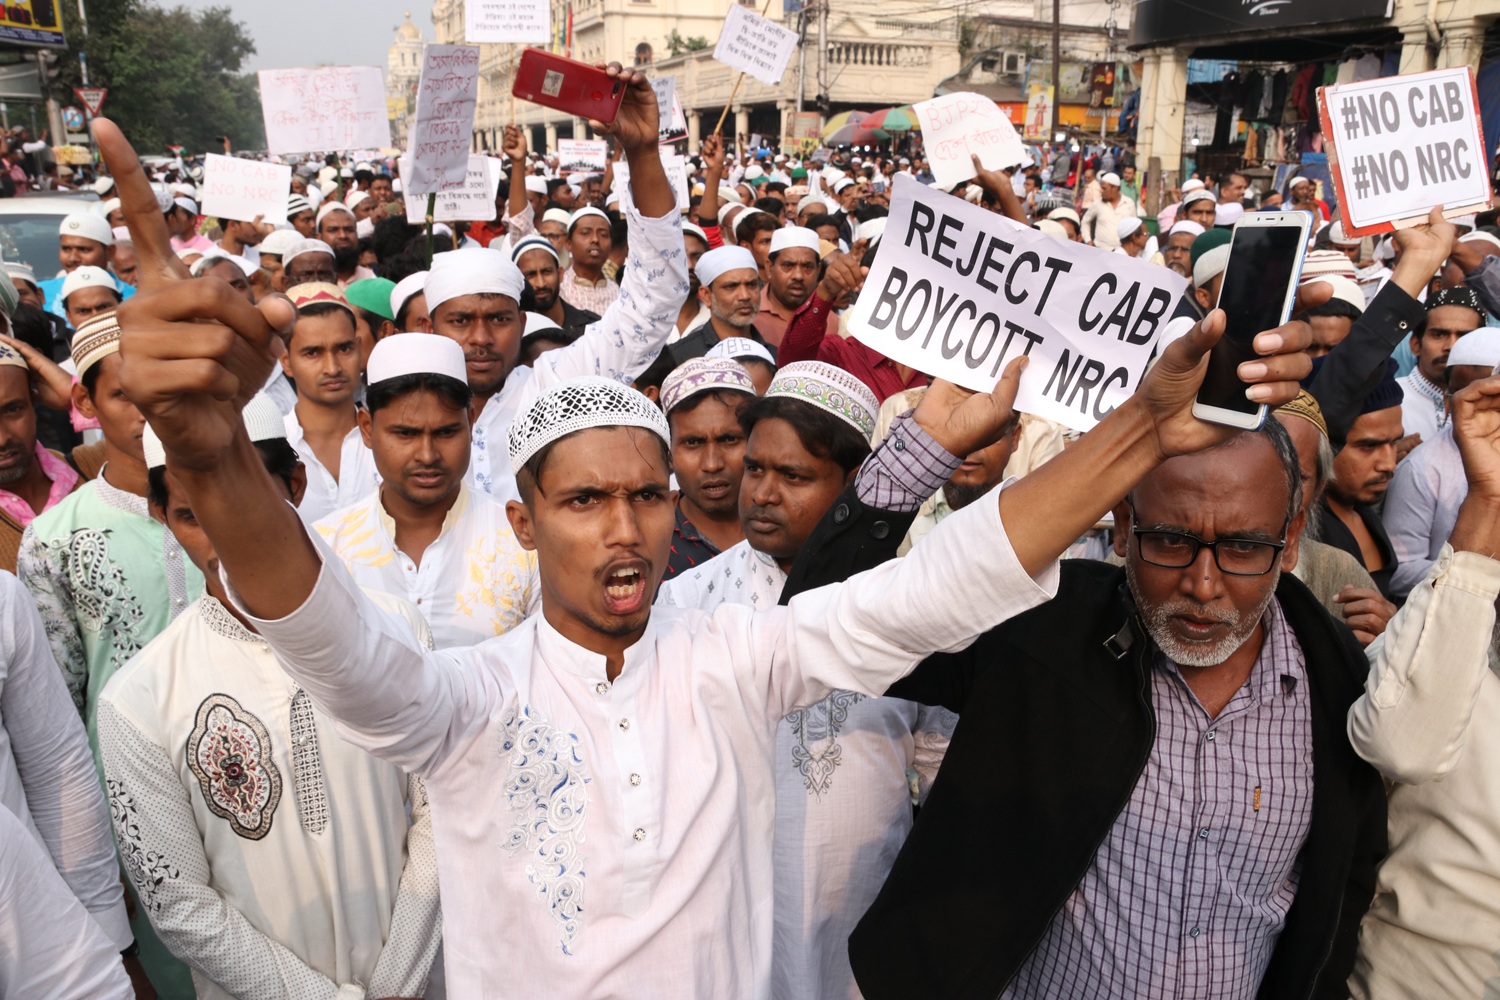 To Invoke Allah or to Not: Secular Islamophobia and the Protesting Indian Muslim